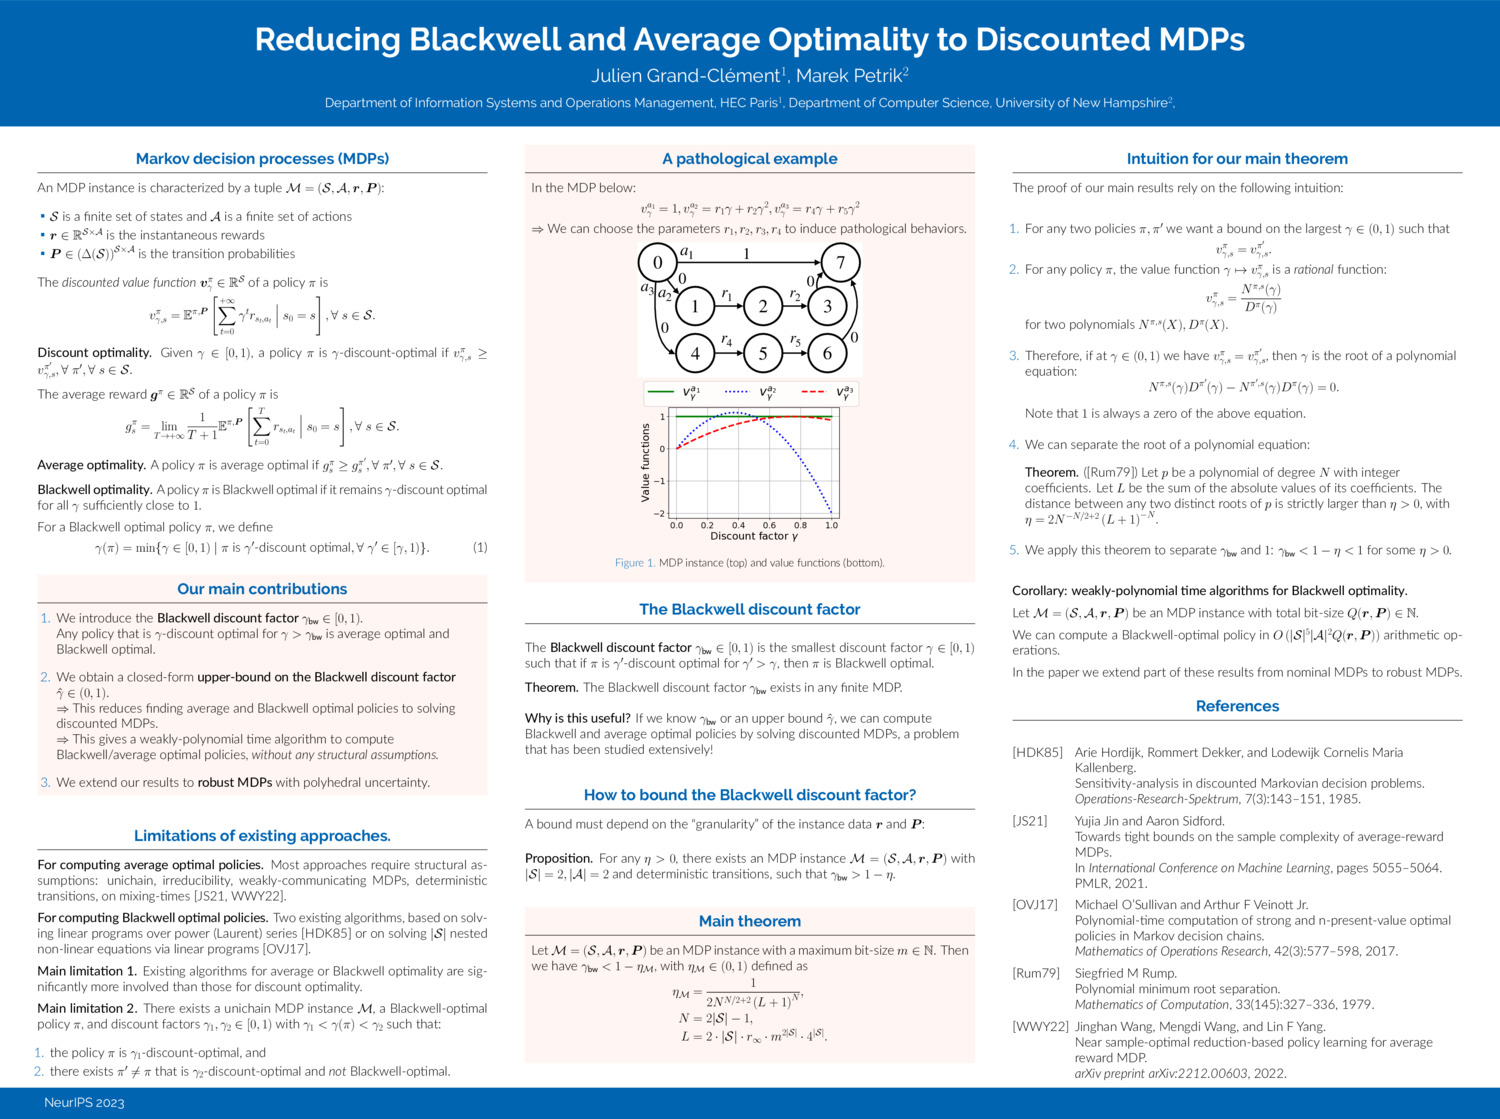 Reducing Blackwell And Average Optimality To Discounted Mdp by marekpetrik